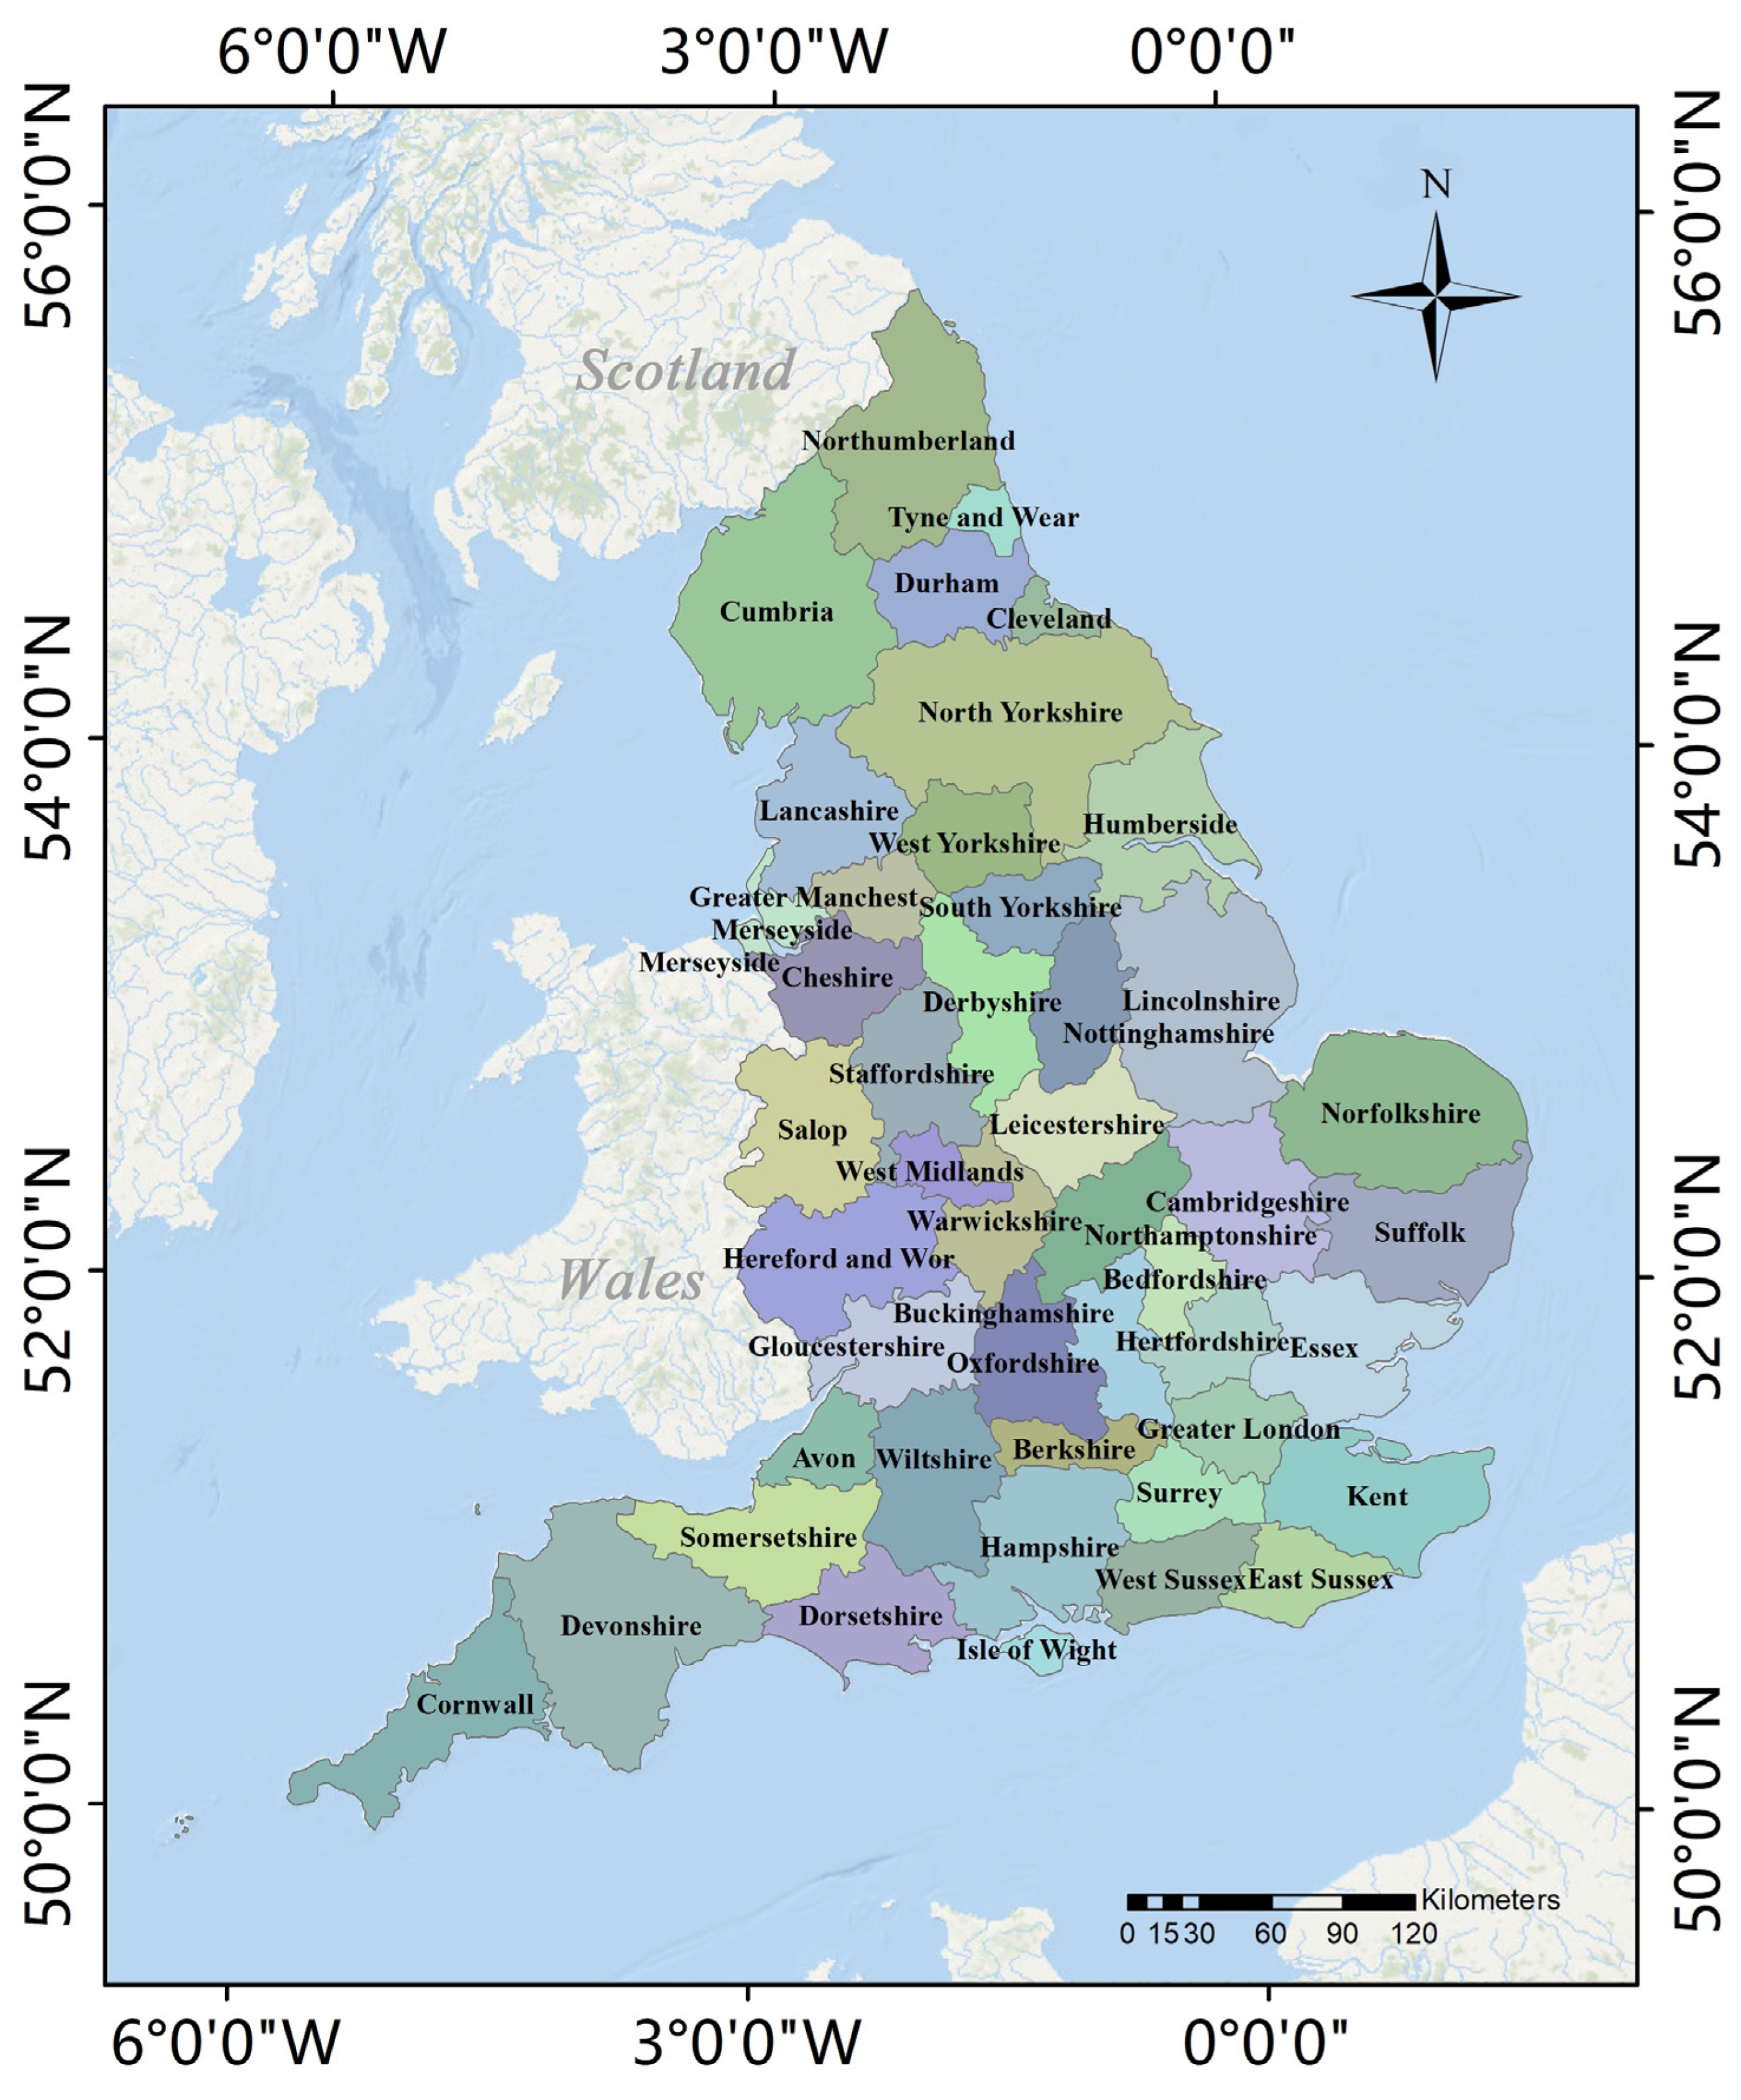 IJERPH | Free Full-Text | Mapping Building-Based Spatiotemporal  Distributions of Carbon Dioxide Emission: A Case Study in England